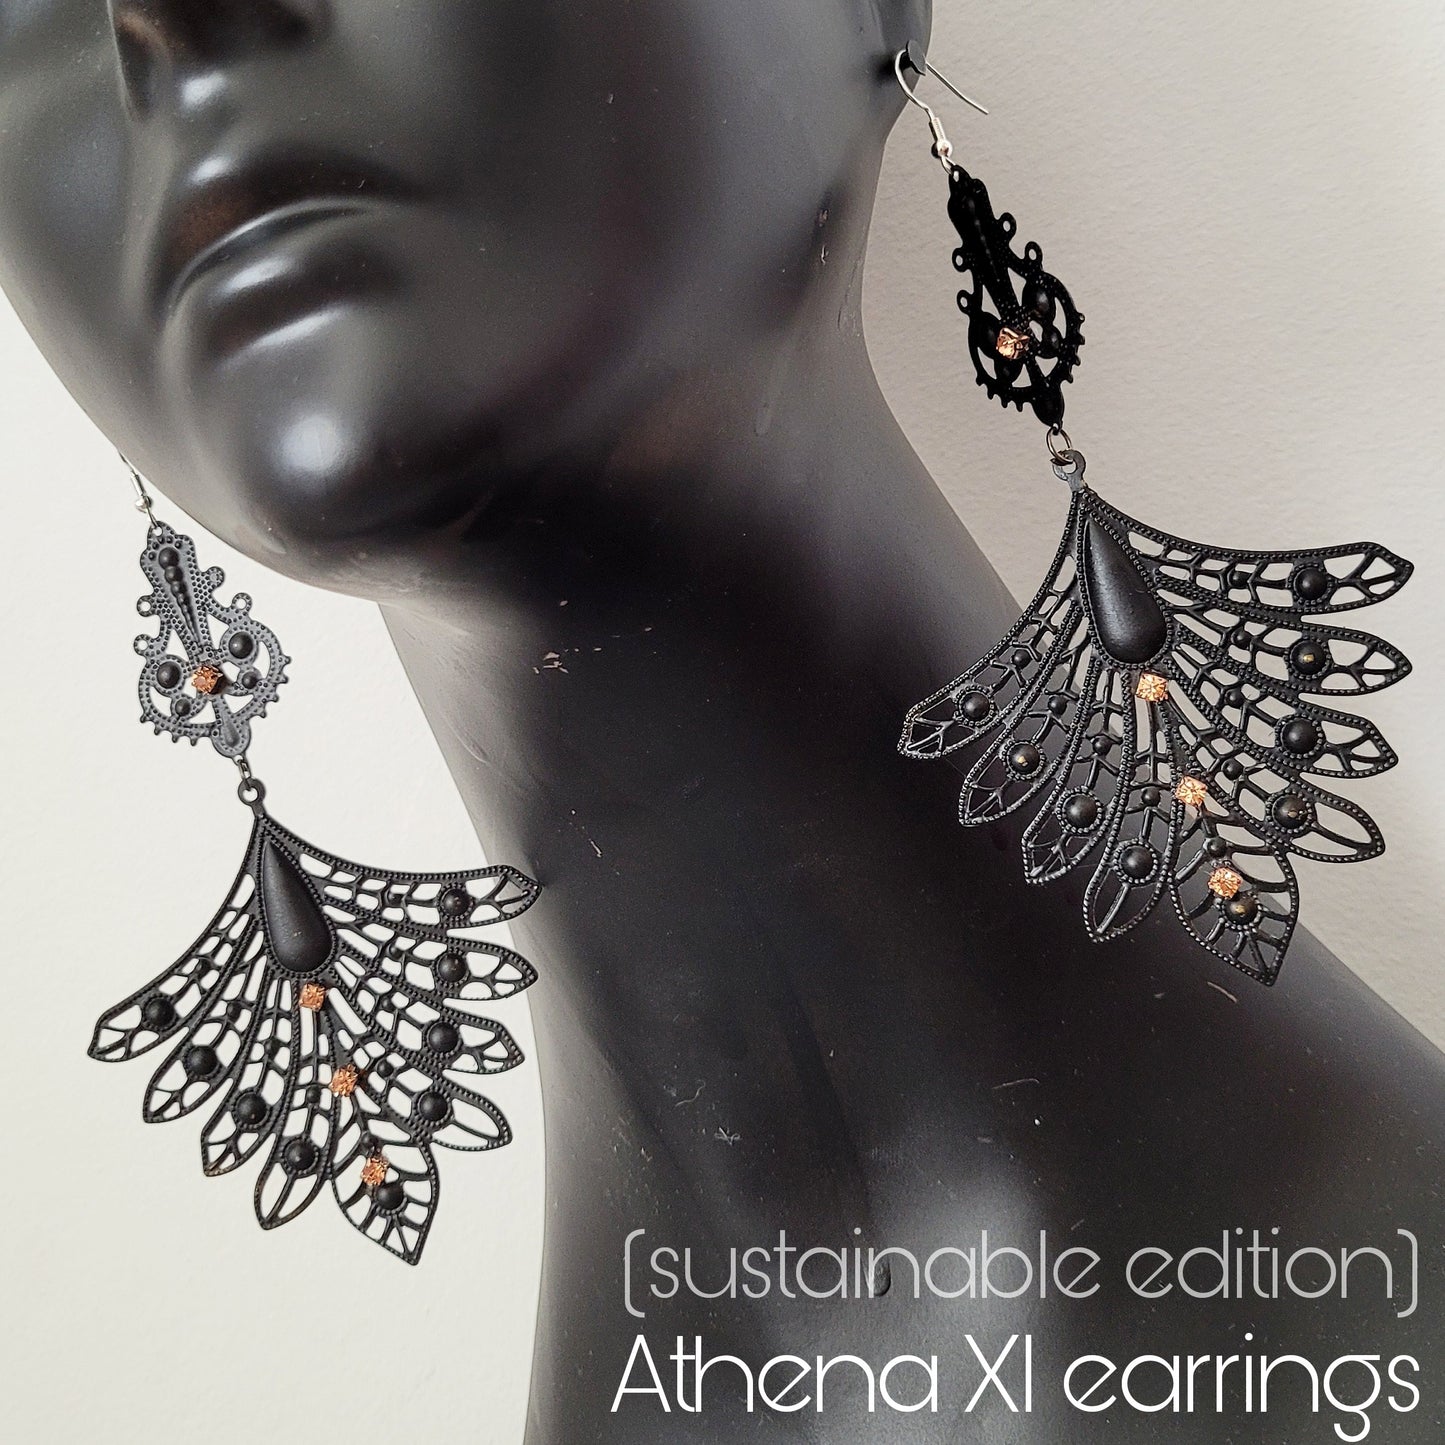 Deusa ex Machina collection: The Athena earrings (hook versions)